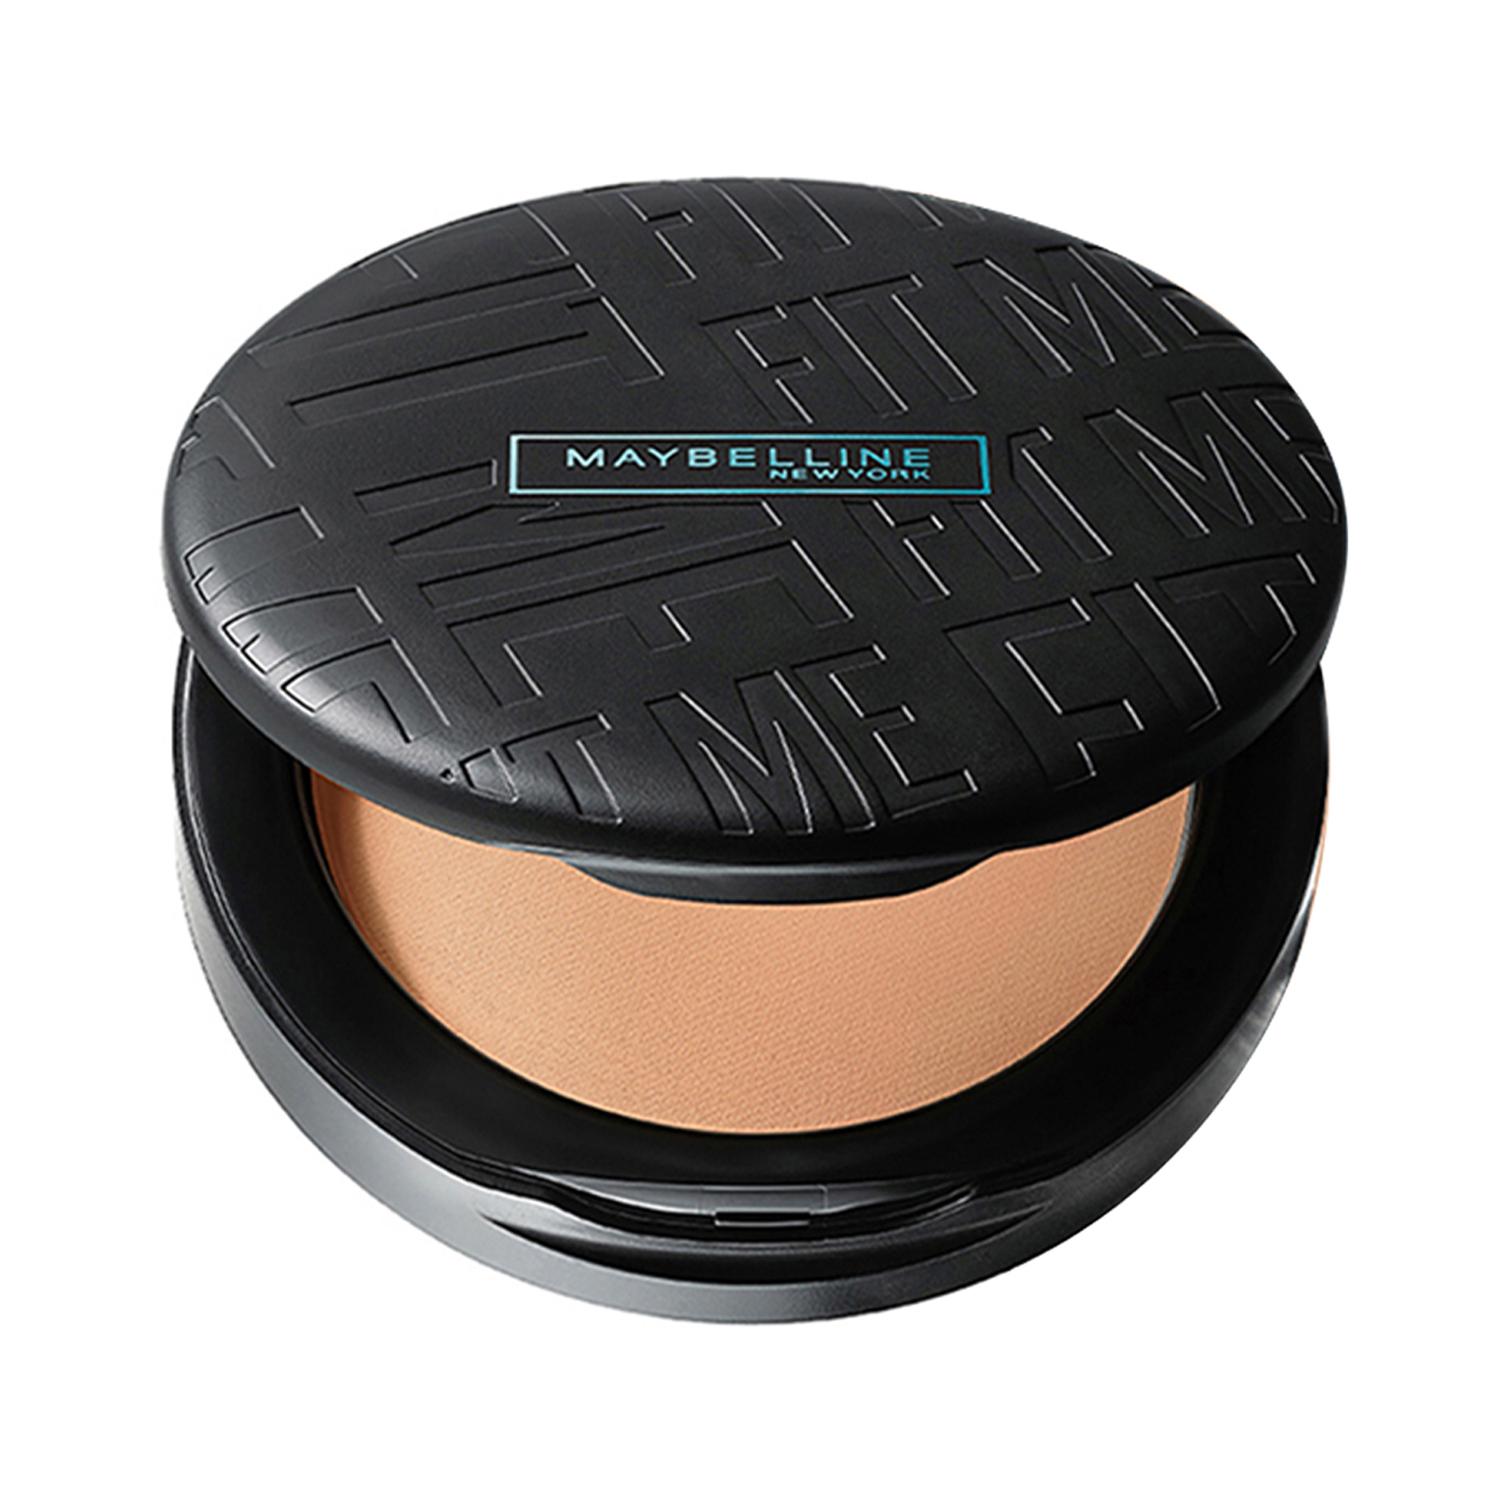 Maybelline Fit Me Compact Matifying Powder 250 sun beige